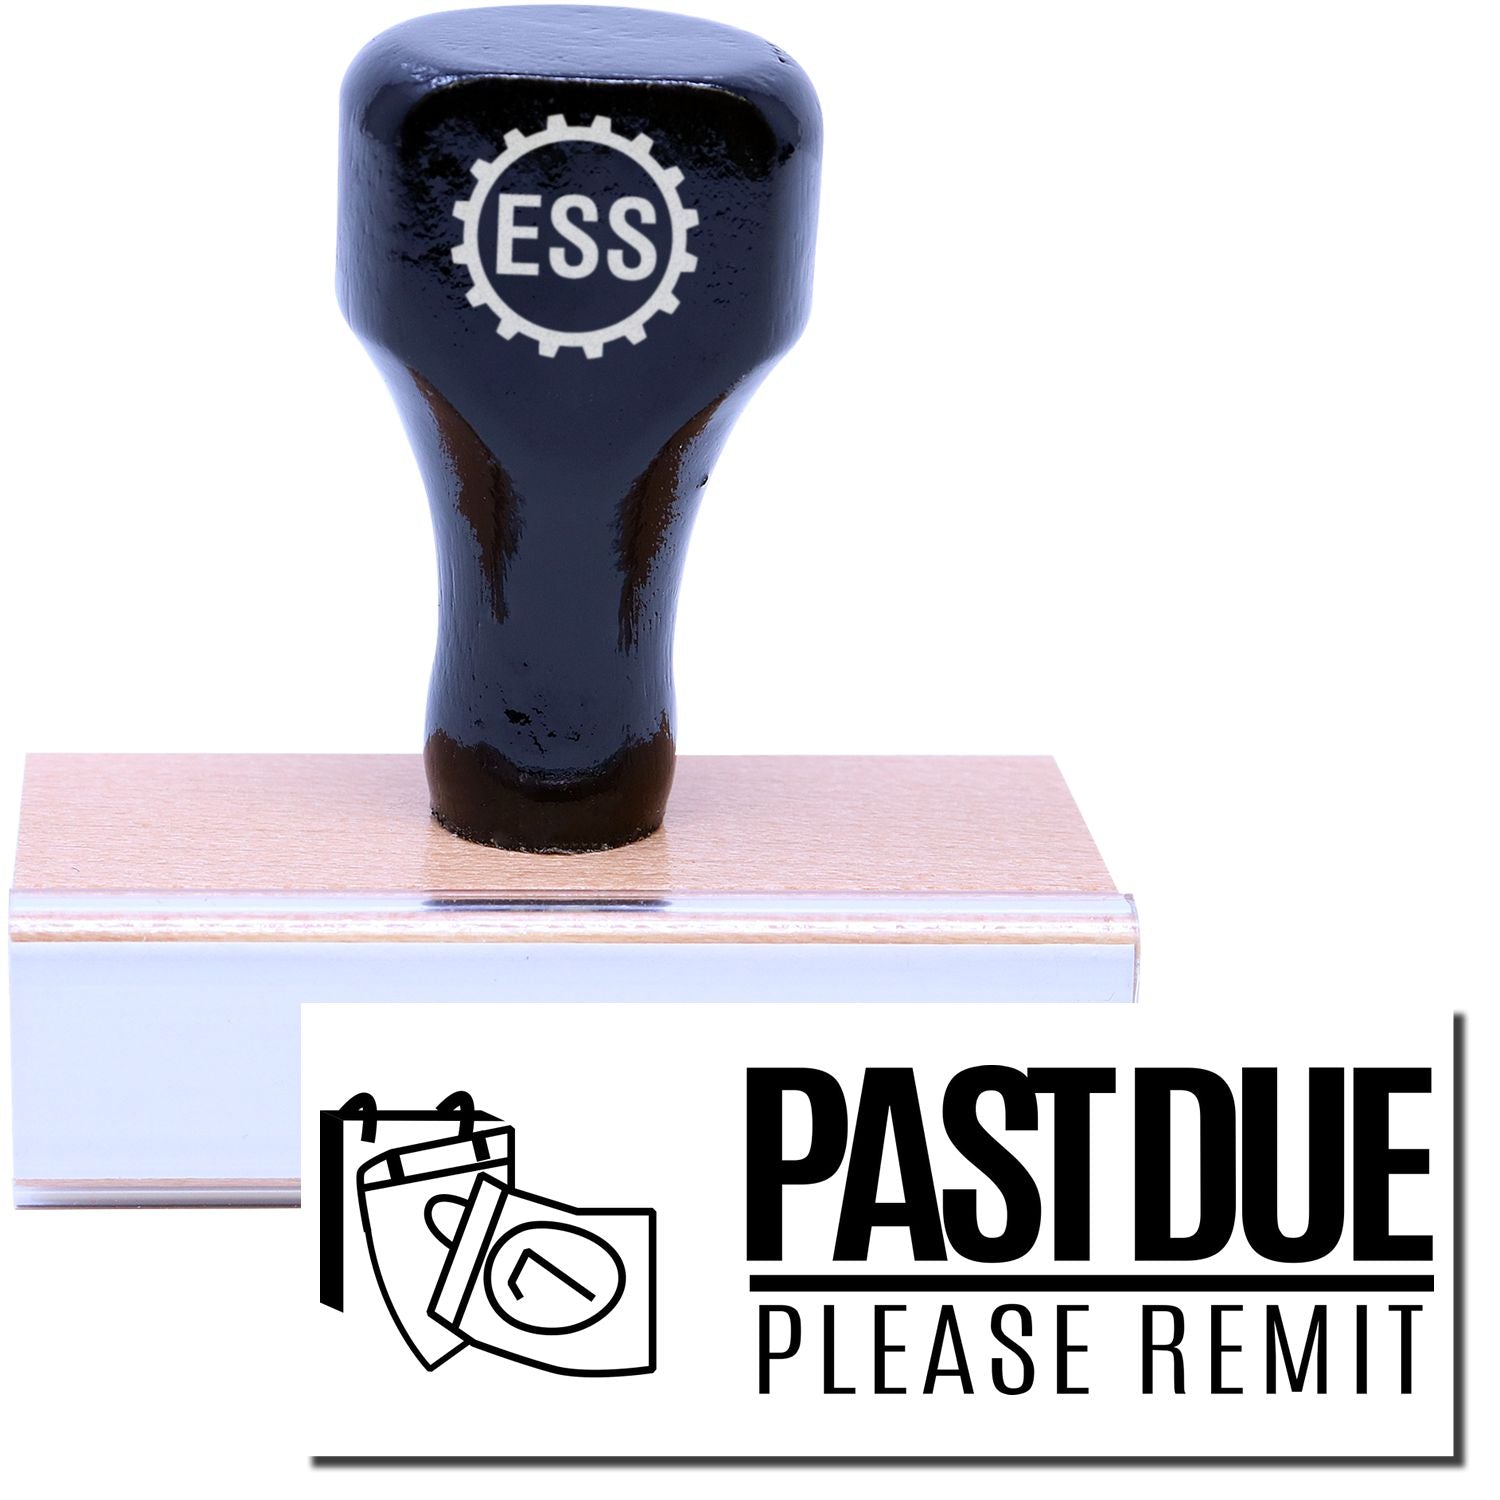 A stock office rubber stamp with a stamped image showing how the text "PAST DUE PLEASE REMIT" with a calendar icon on the left side is displayed after stamping.